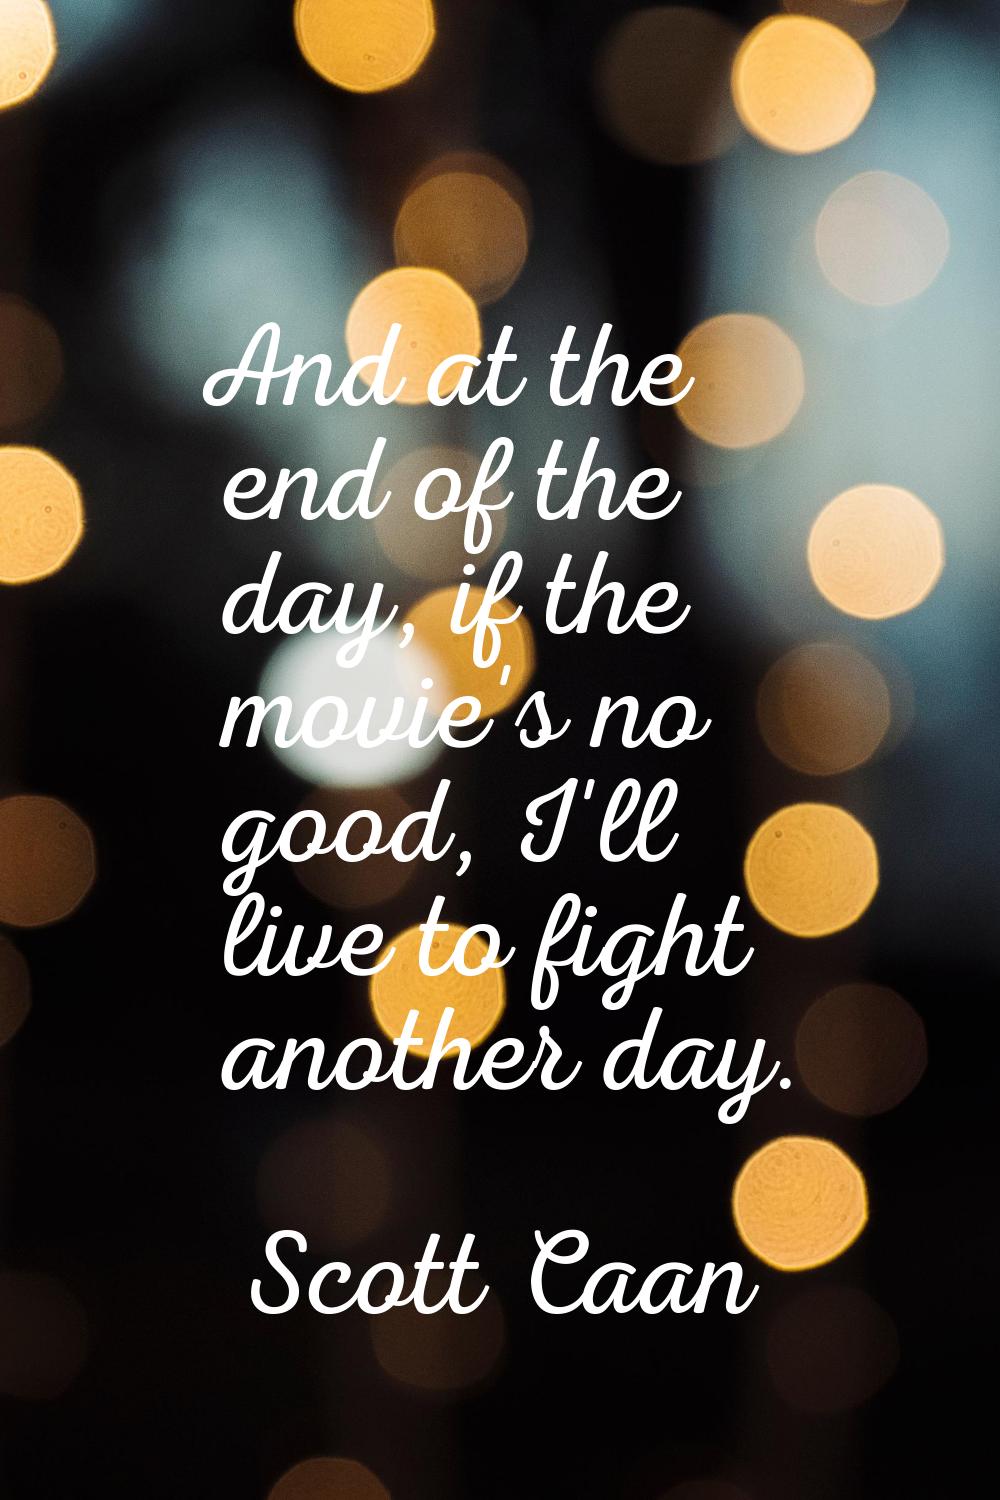 And at the end of the day, if the movie's no good, I'll live to fight another day.